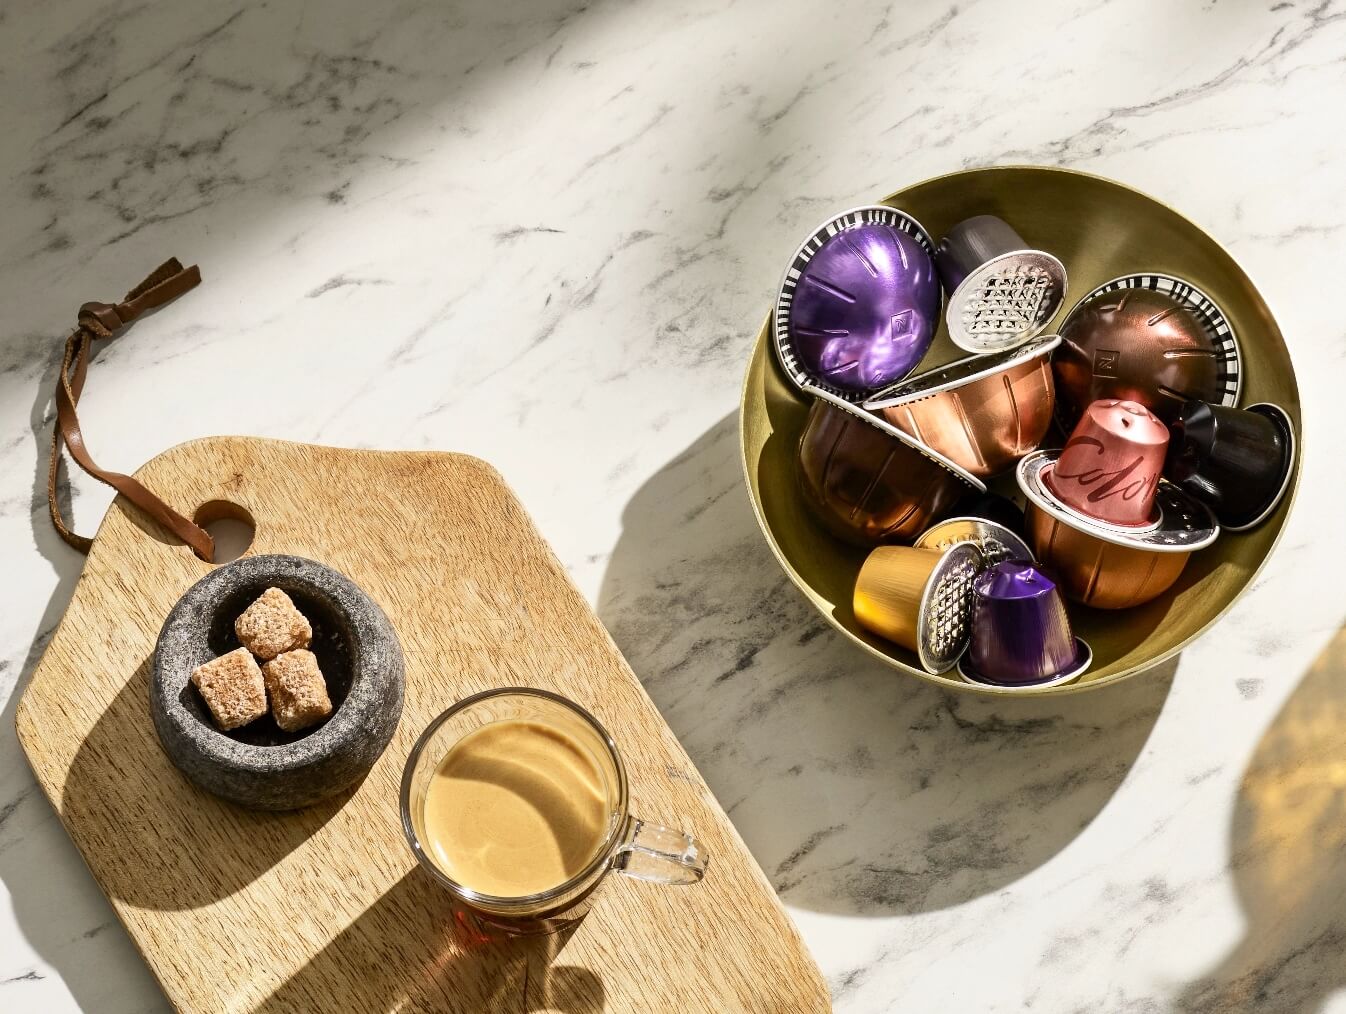 Nespresso pods in a gold bowl on a white marble counter.